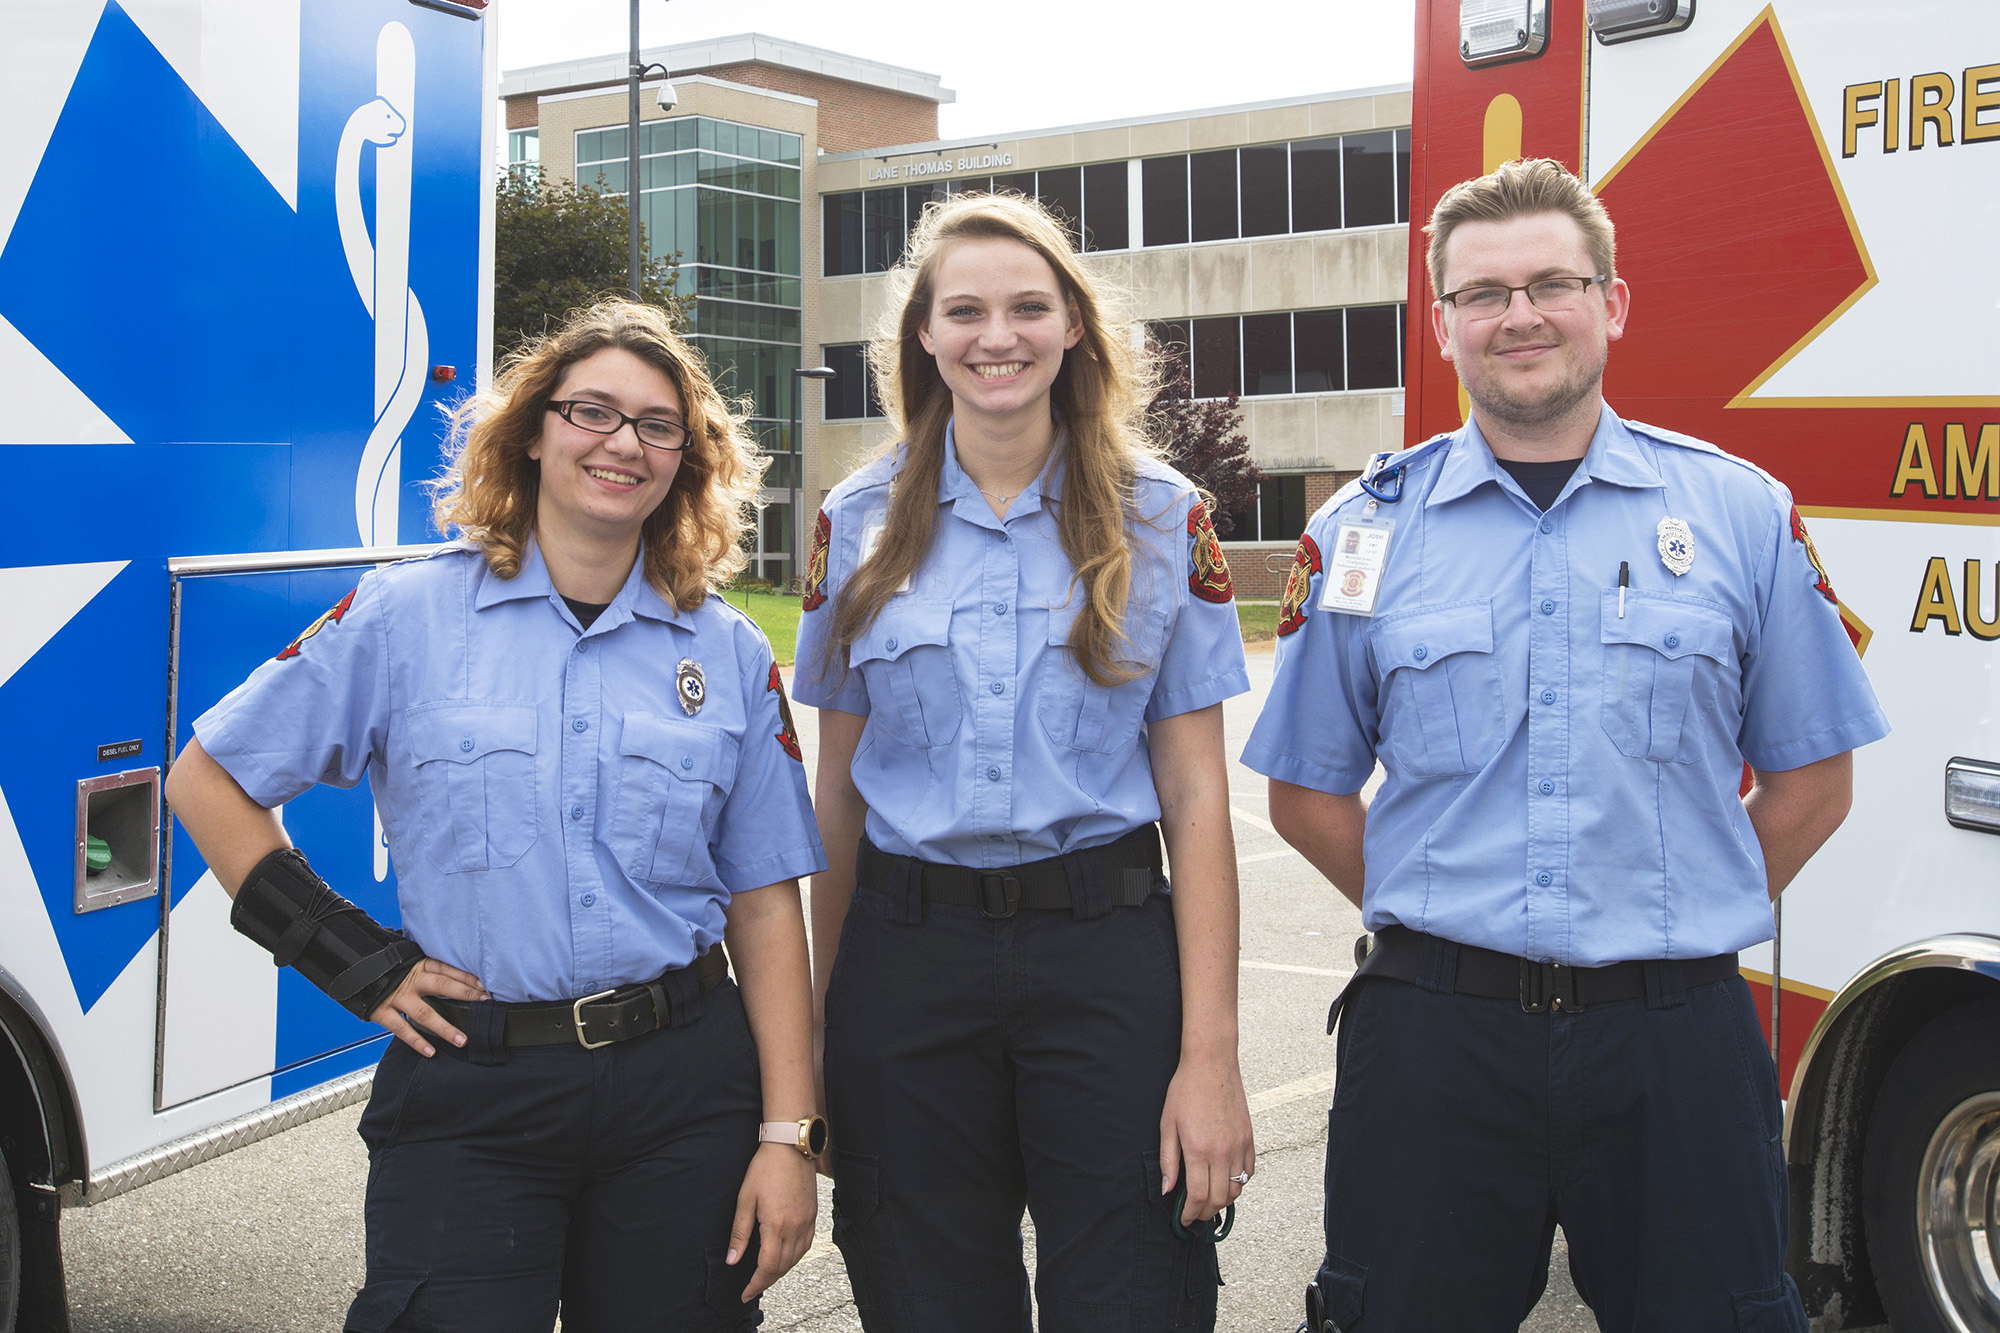 Pictured, from left to right, are KCC Basic EMT Program alumni and current Paramedic Program students Kristen Jaskiw, Abigail Sanger and Josh Turner.